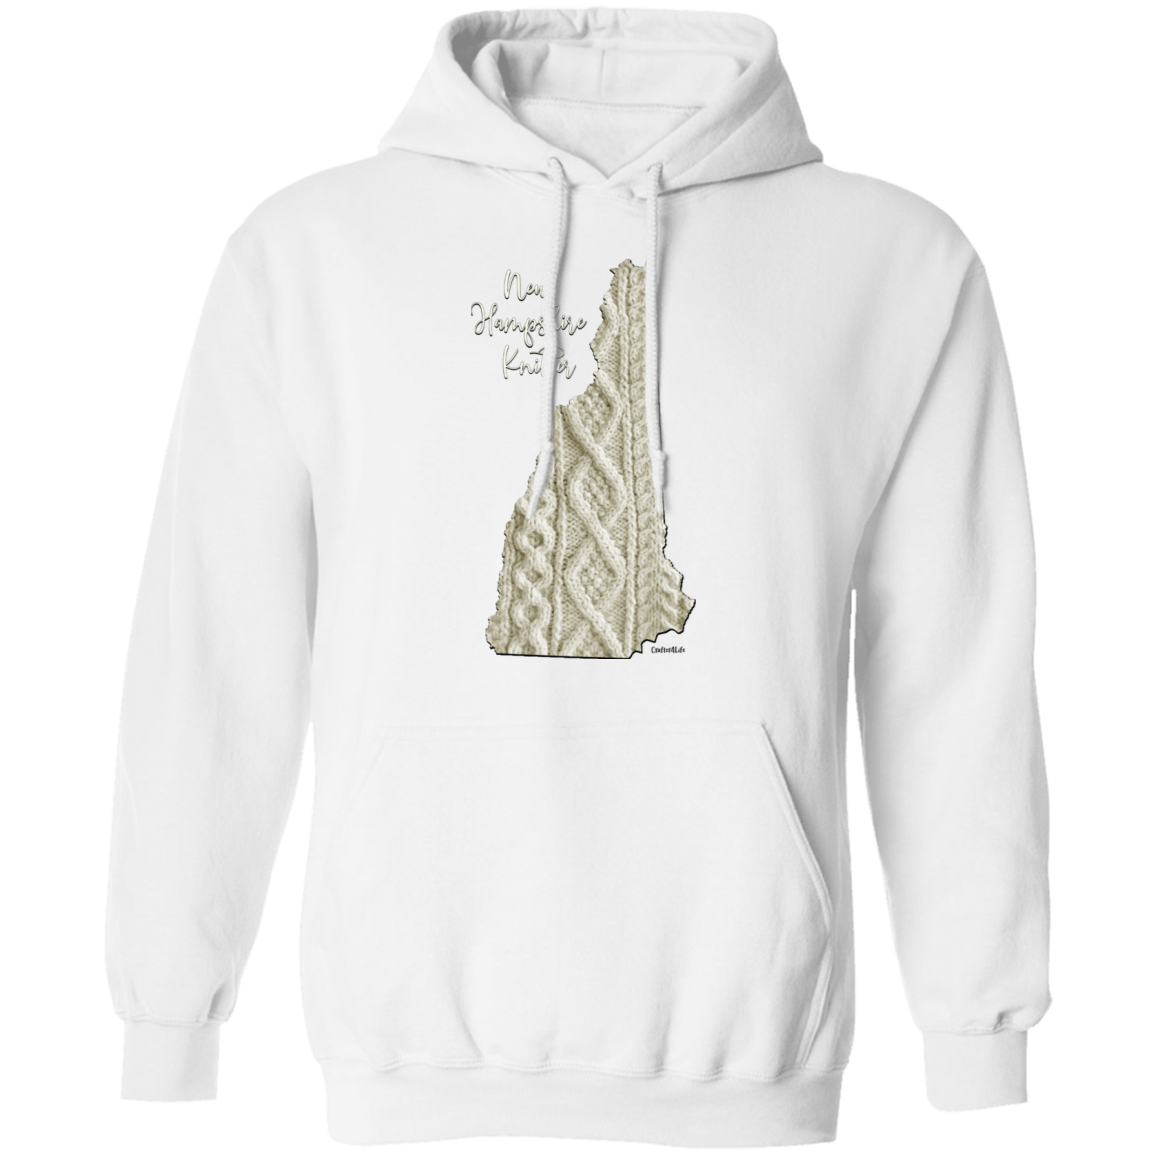 New Hampshire Knitter Pullover Hoodie